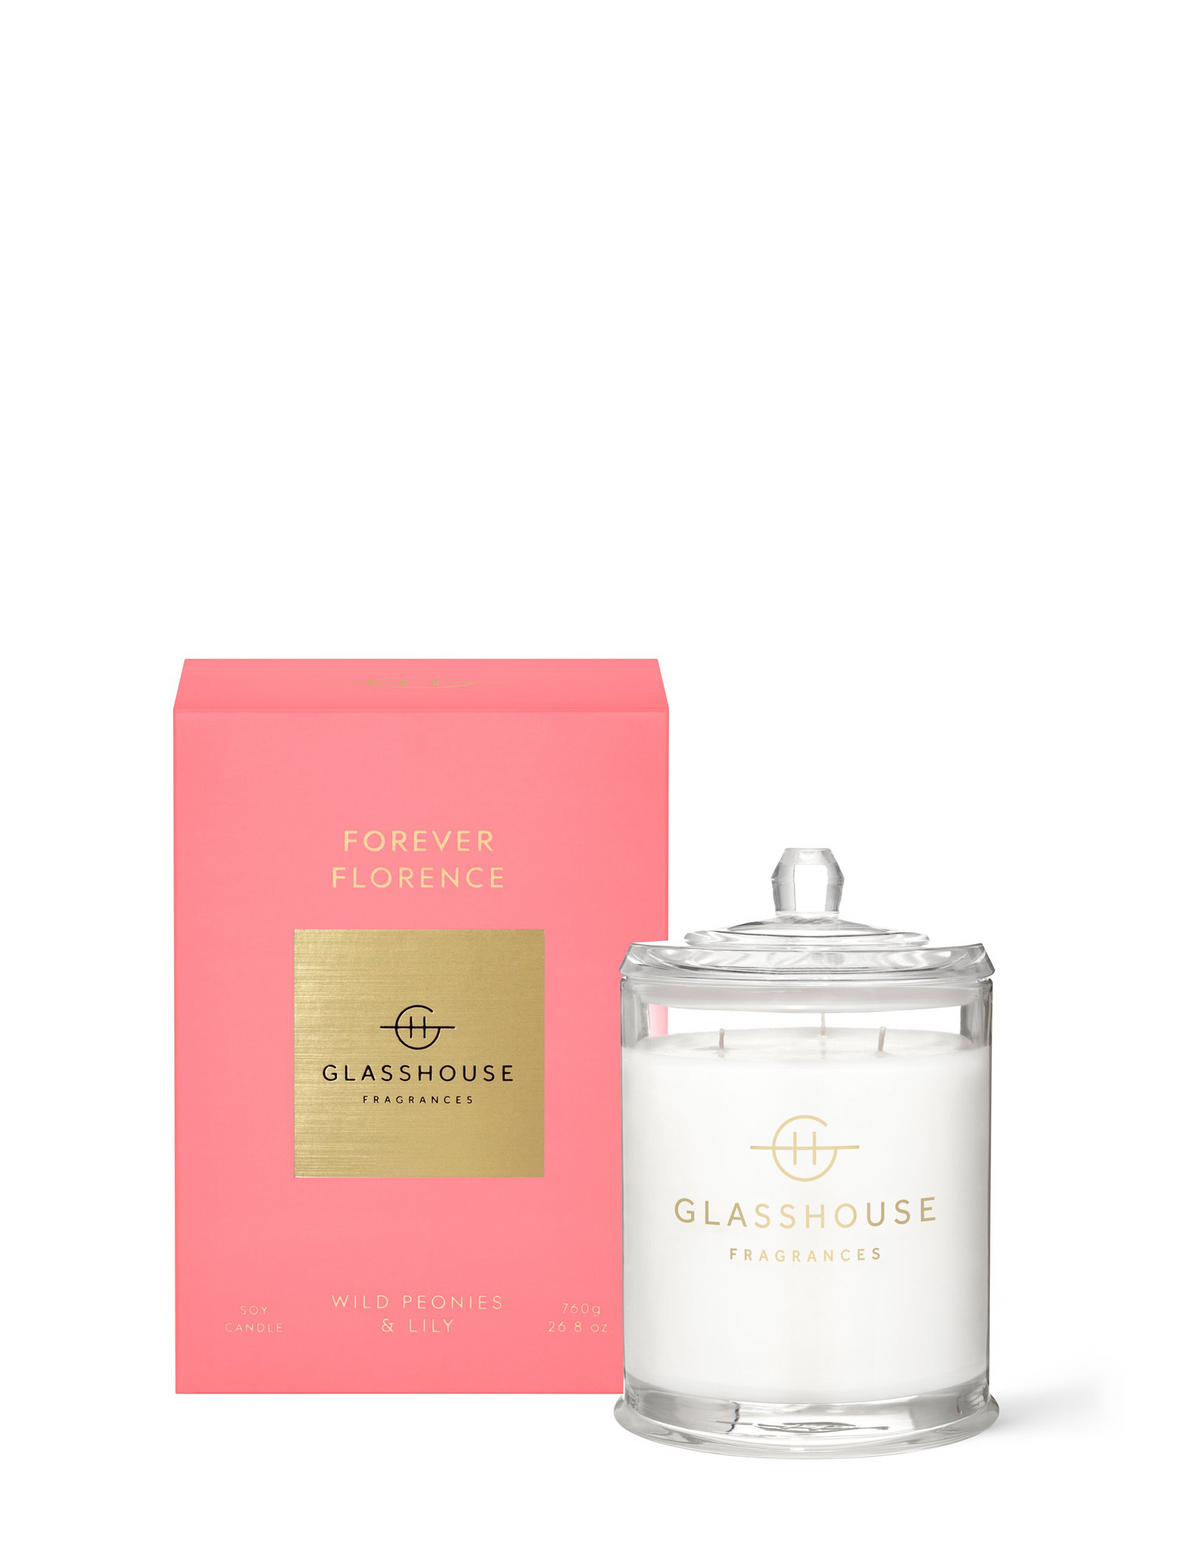 Glasshouse Fragrances Forever Florence | Wild Peonies &amp; Lily Candle 760g